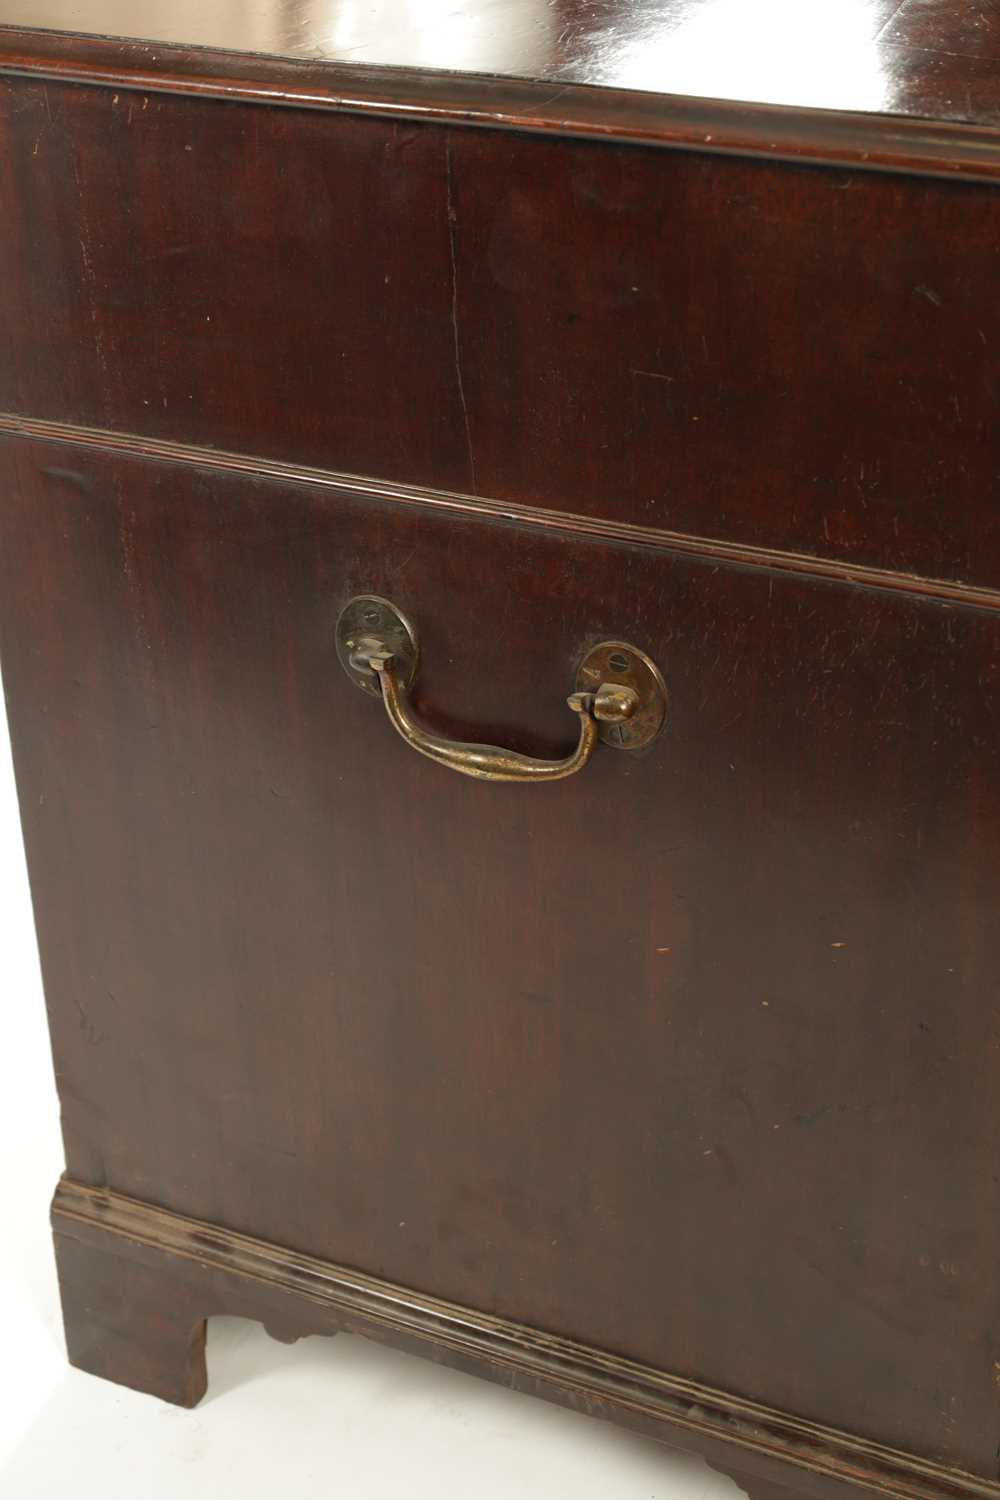 A GEORGE III MAHOGANY GENTLEMAN’S LIBRARY CHEST WITH SECRETAIRE DRAWER - Image 10 of 10